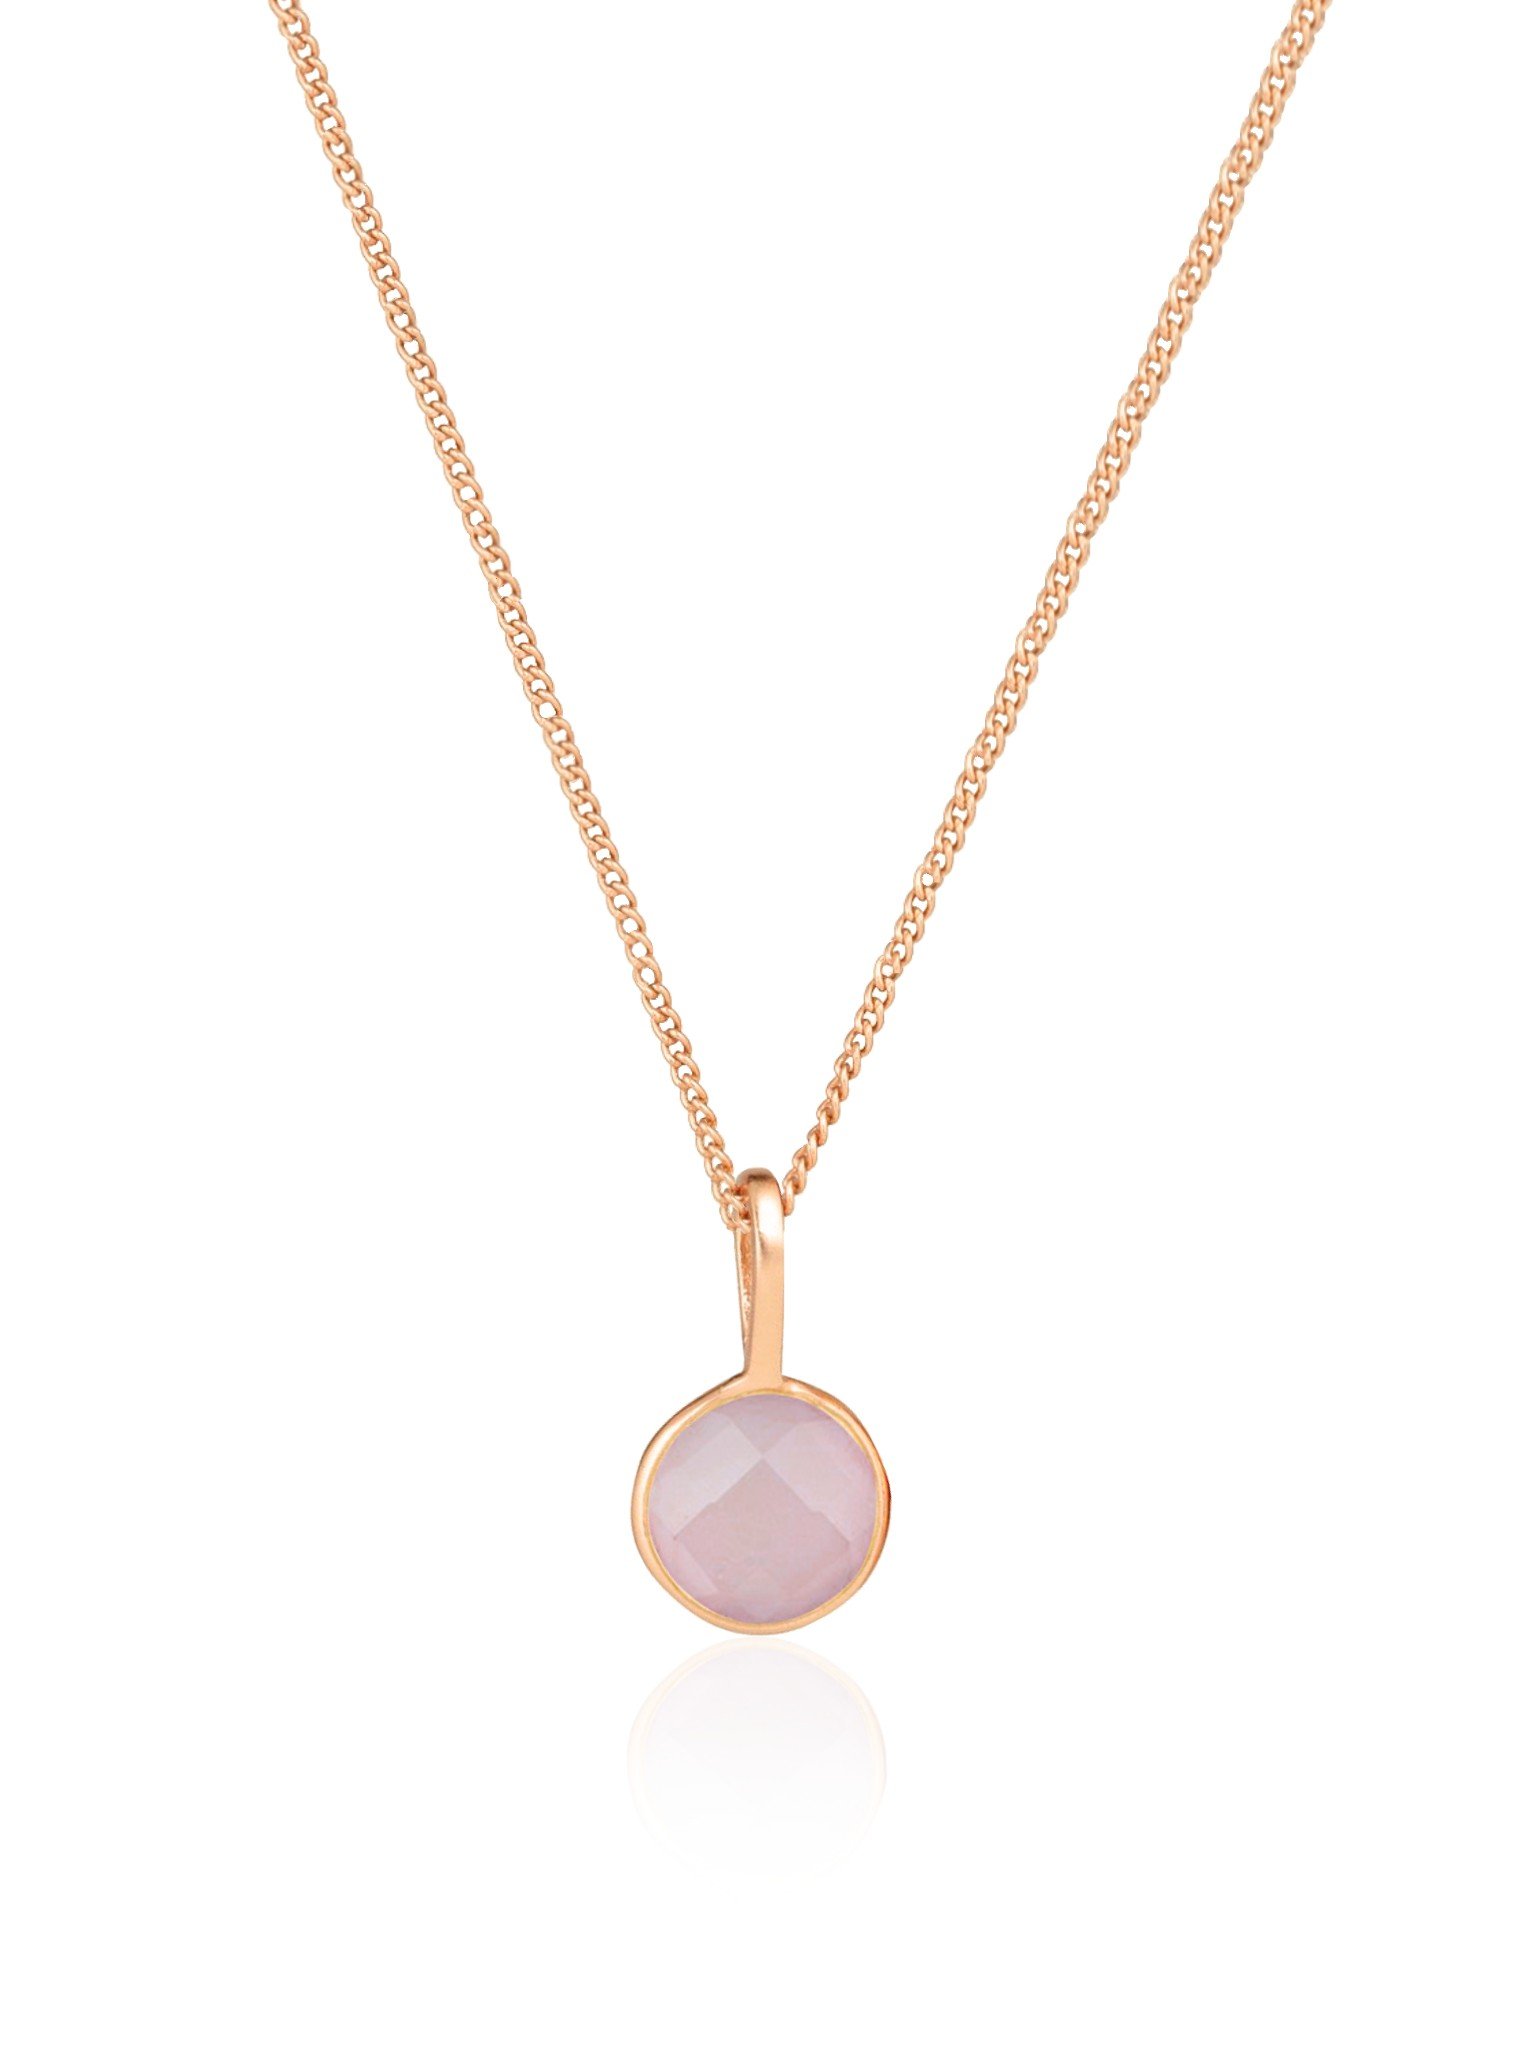 LOVE Rose Quartz Carved Heart Necklace with Gold Setting SALE – Jane Win by  Jane Winchester Paradis